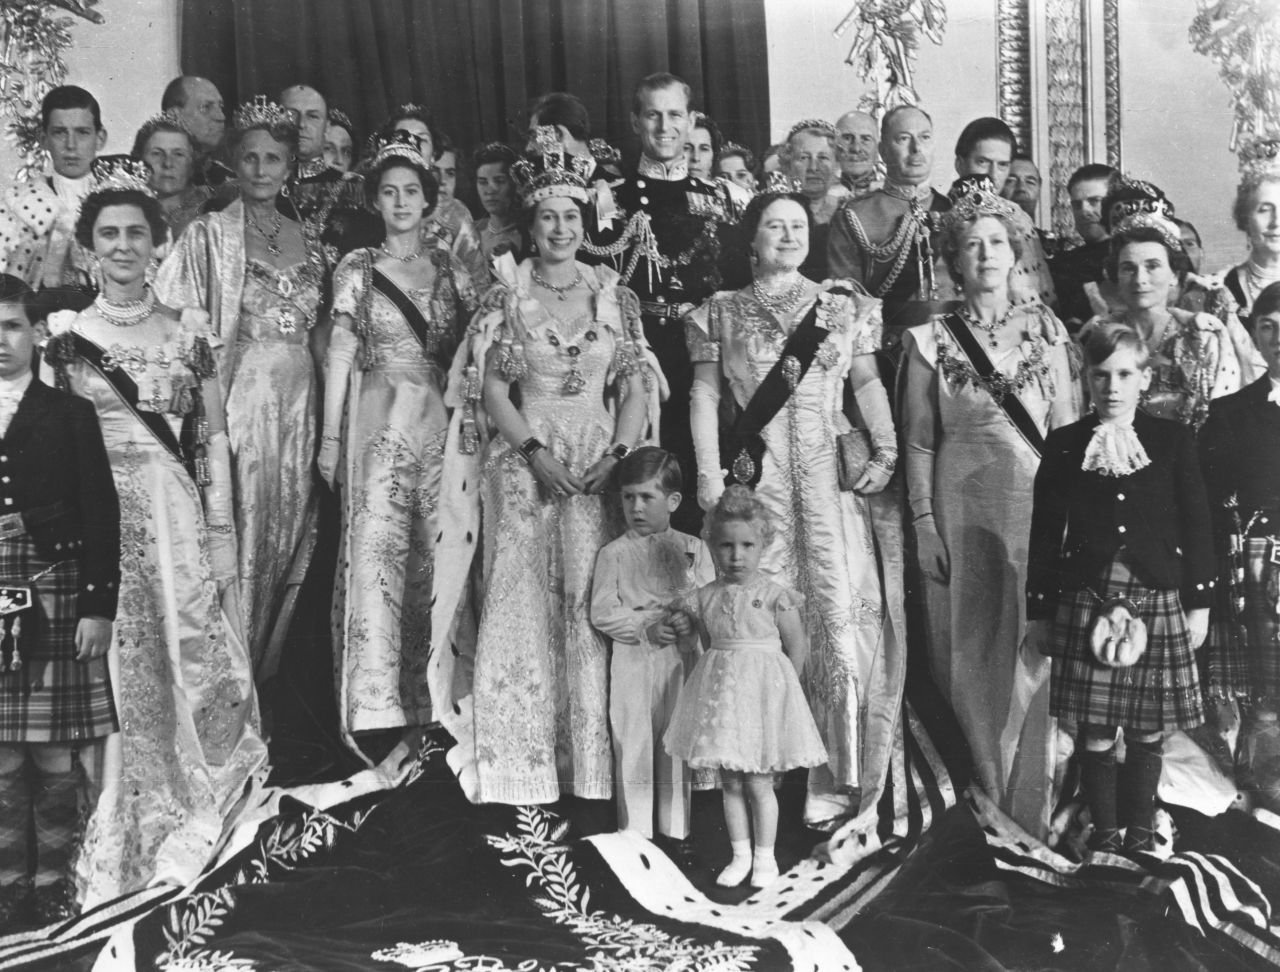 Members of the royal family pose for a photo in the throne room of Buckingham Palace.